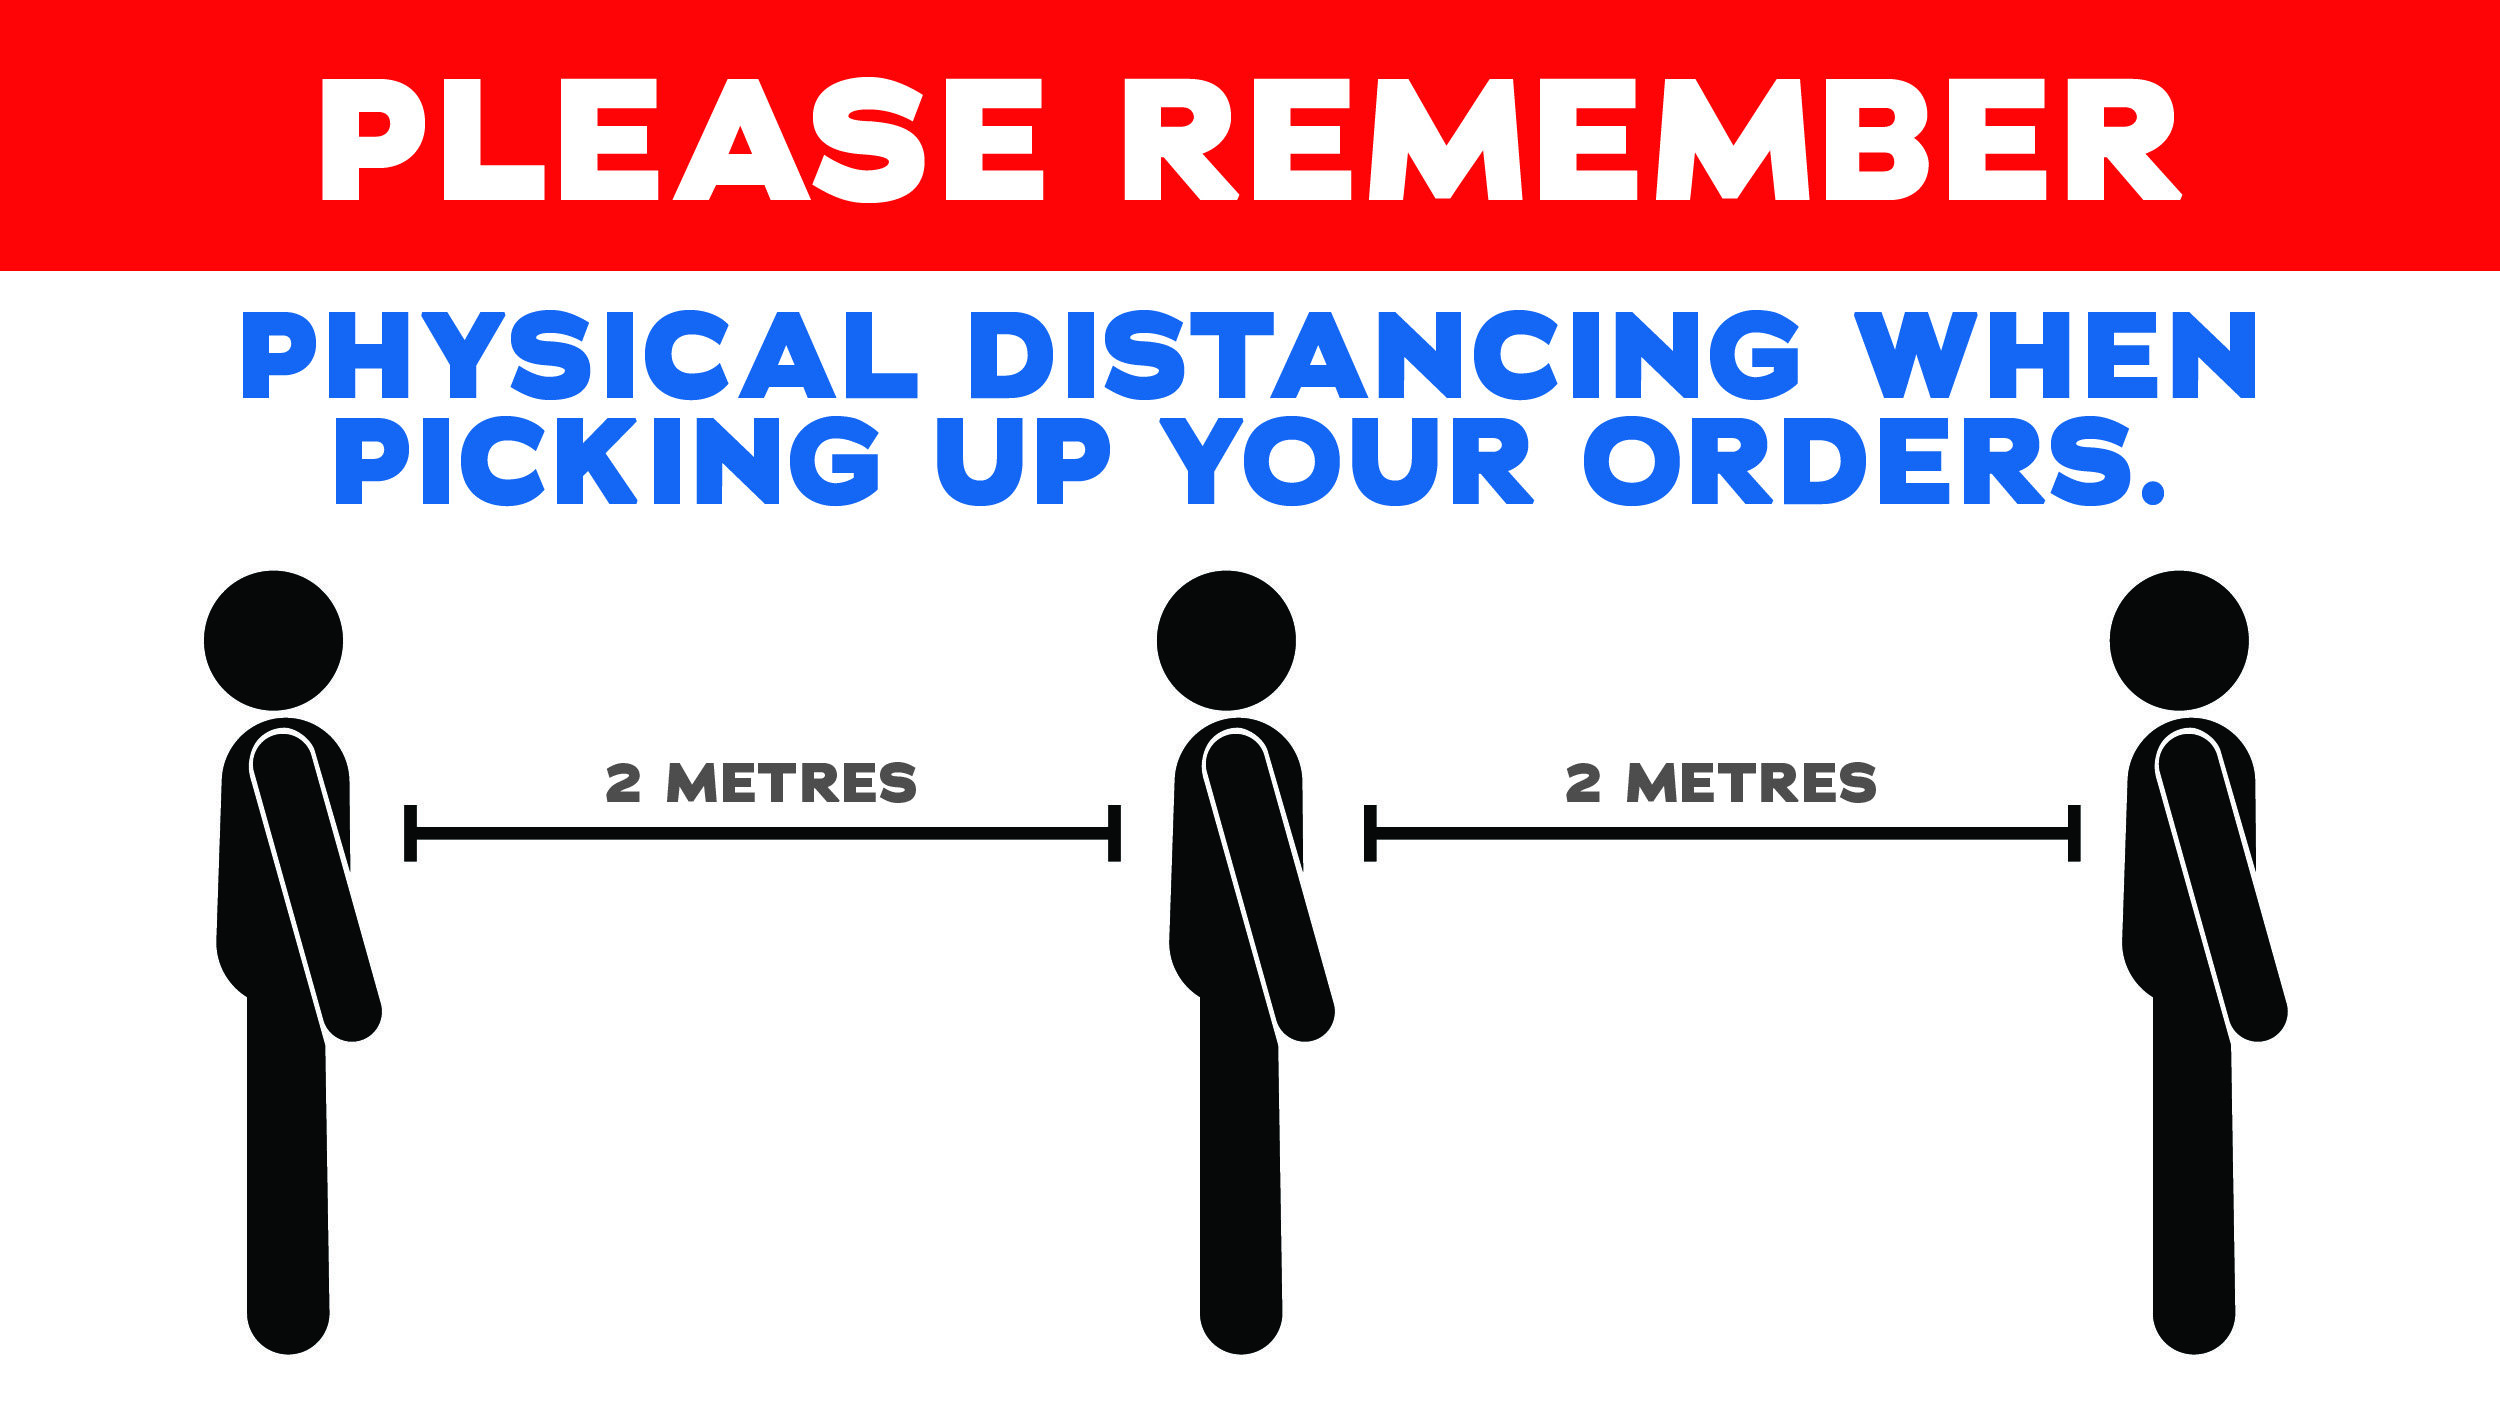 Please remember physical distancing when picking up your orders.